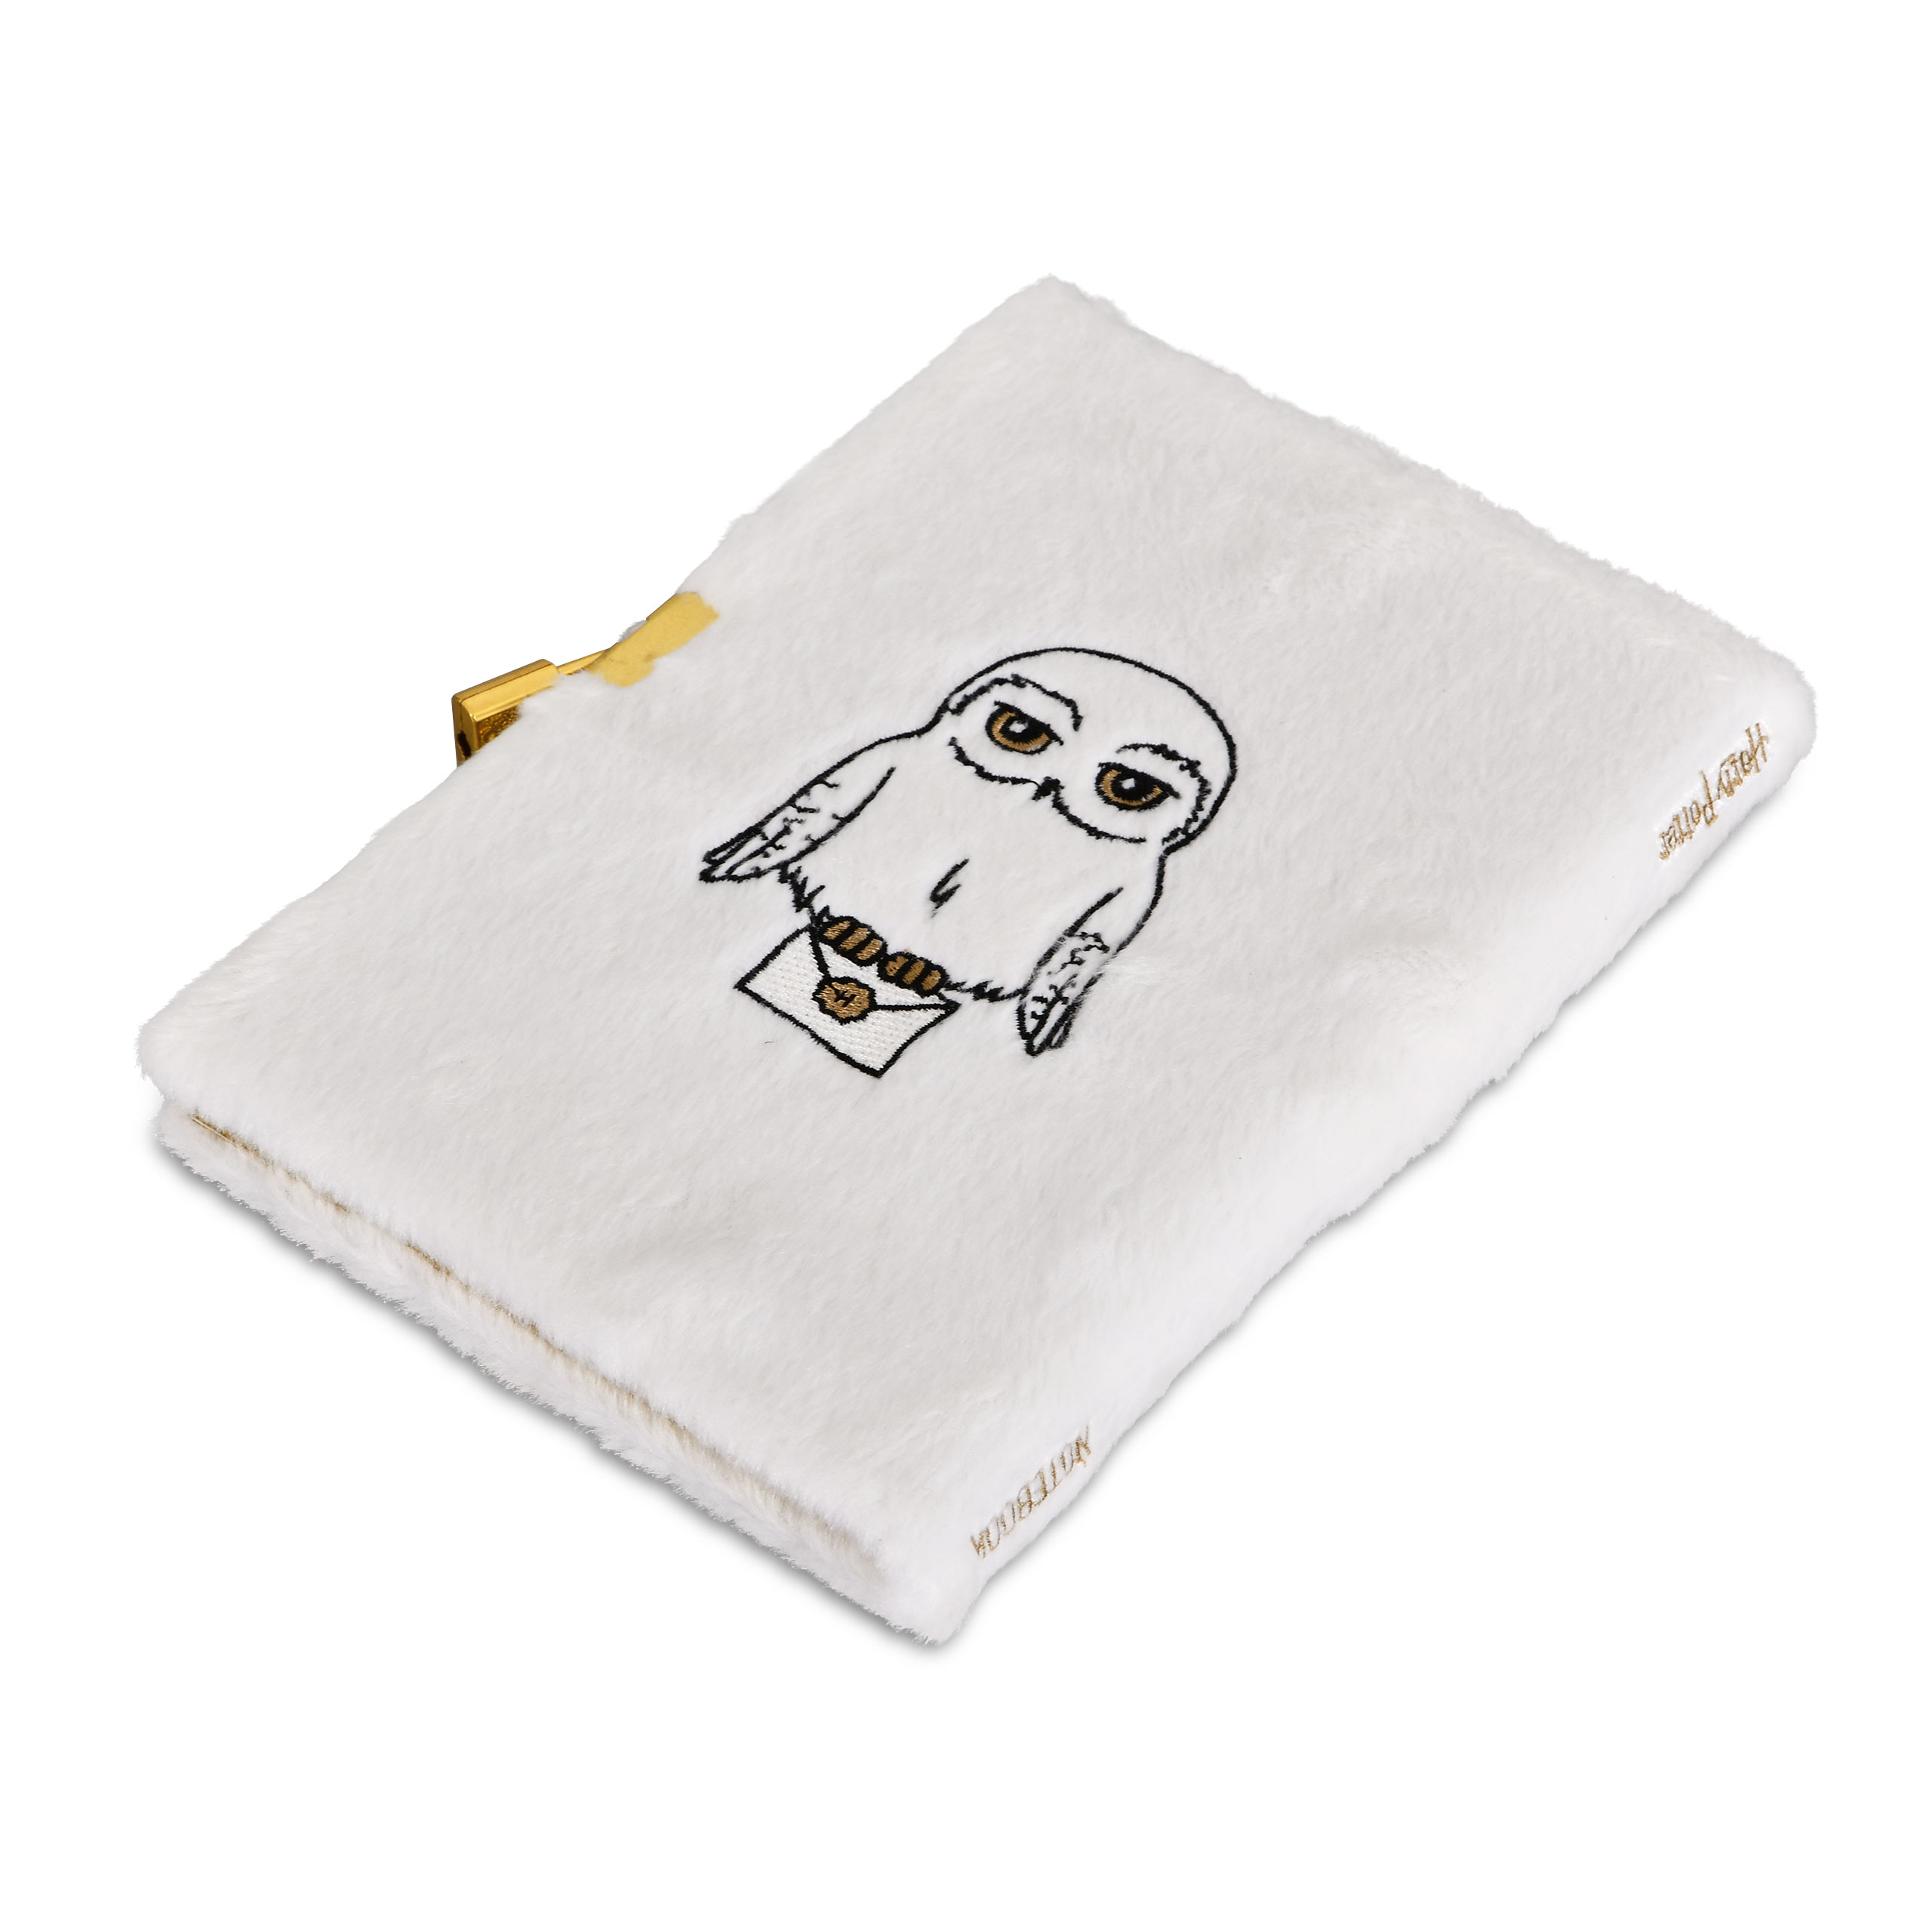 Harry Potter - Hedwig plush notebook A5 with lock